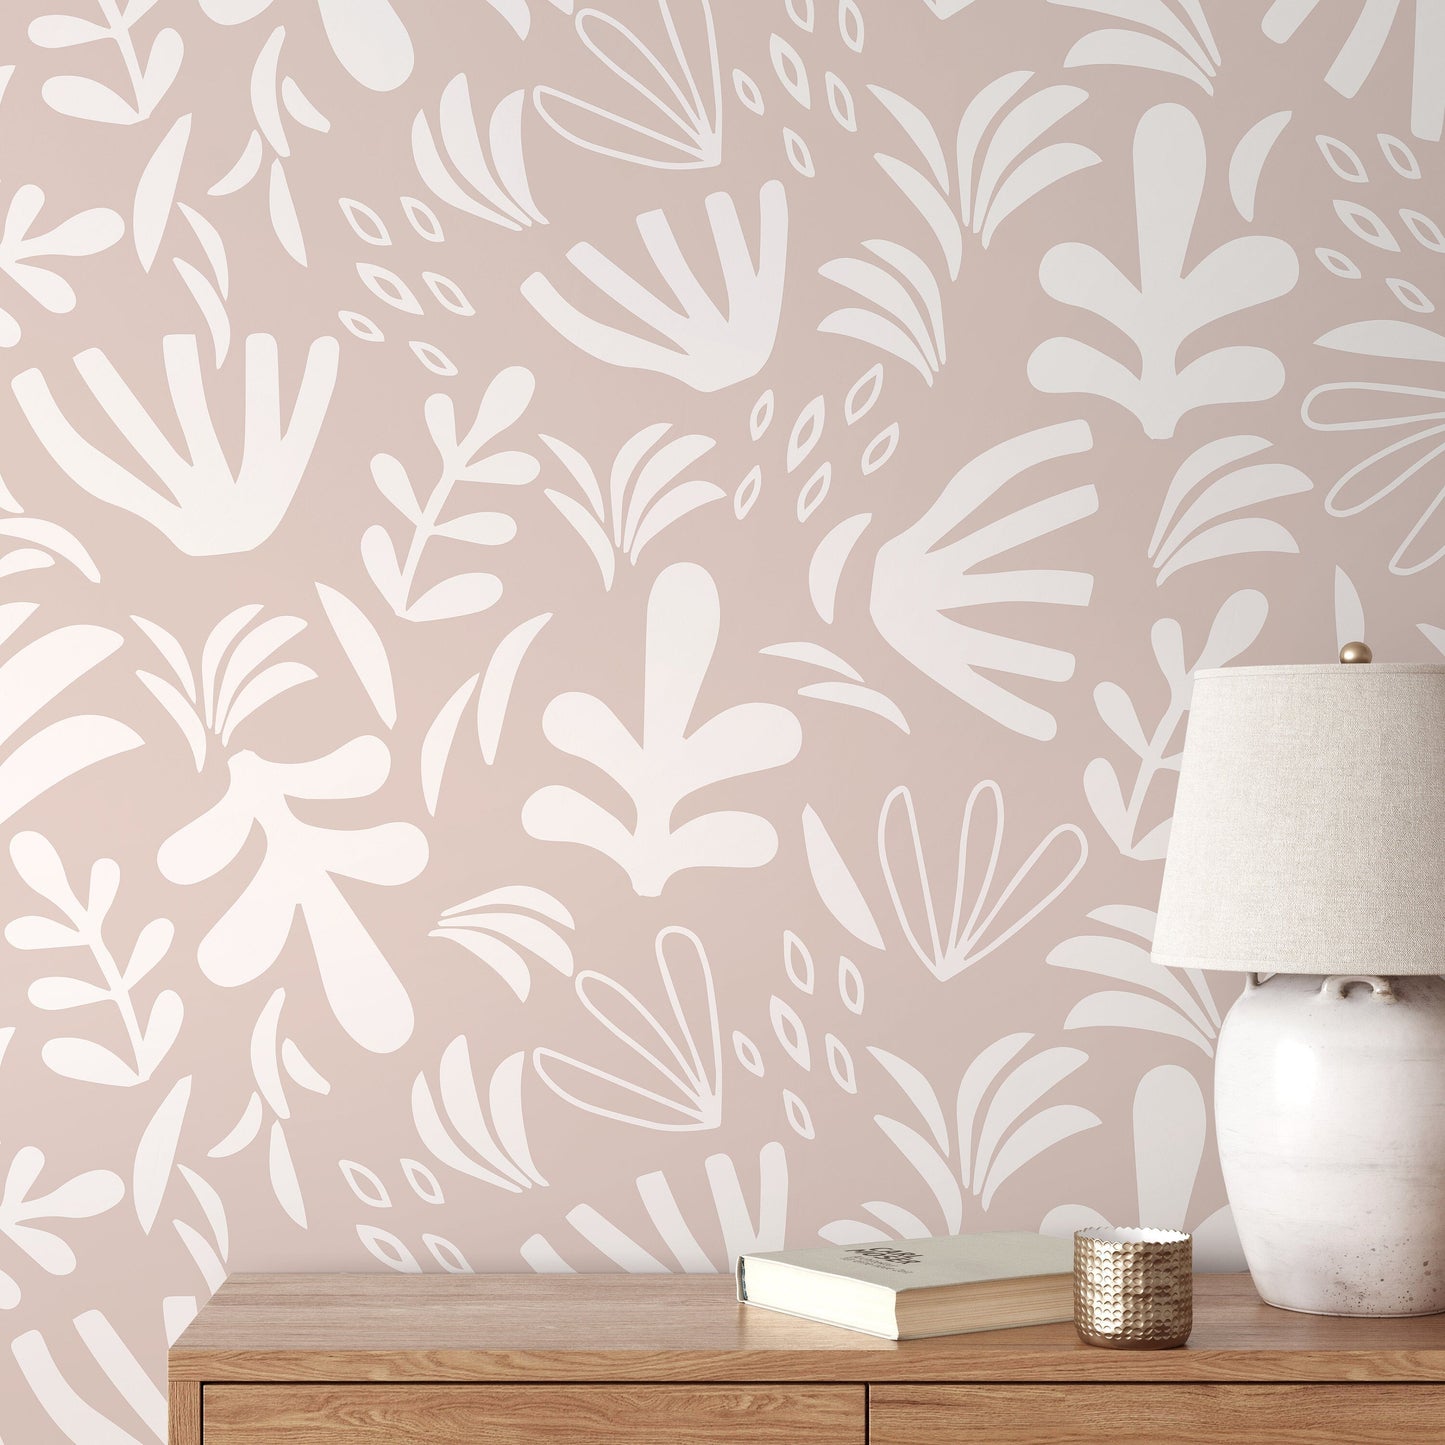 Neutral Abstract Garden Wallpaper Boho Wallpaper Peel and Stick and Traditional Wallpaper - D678